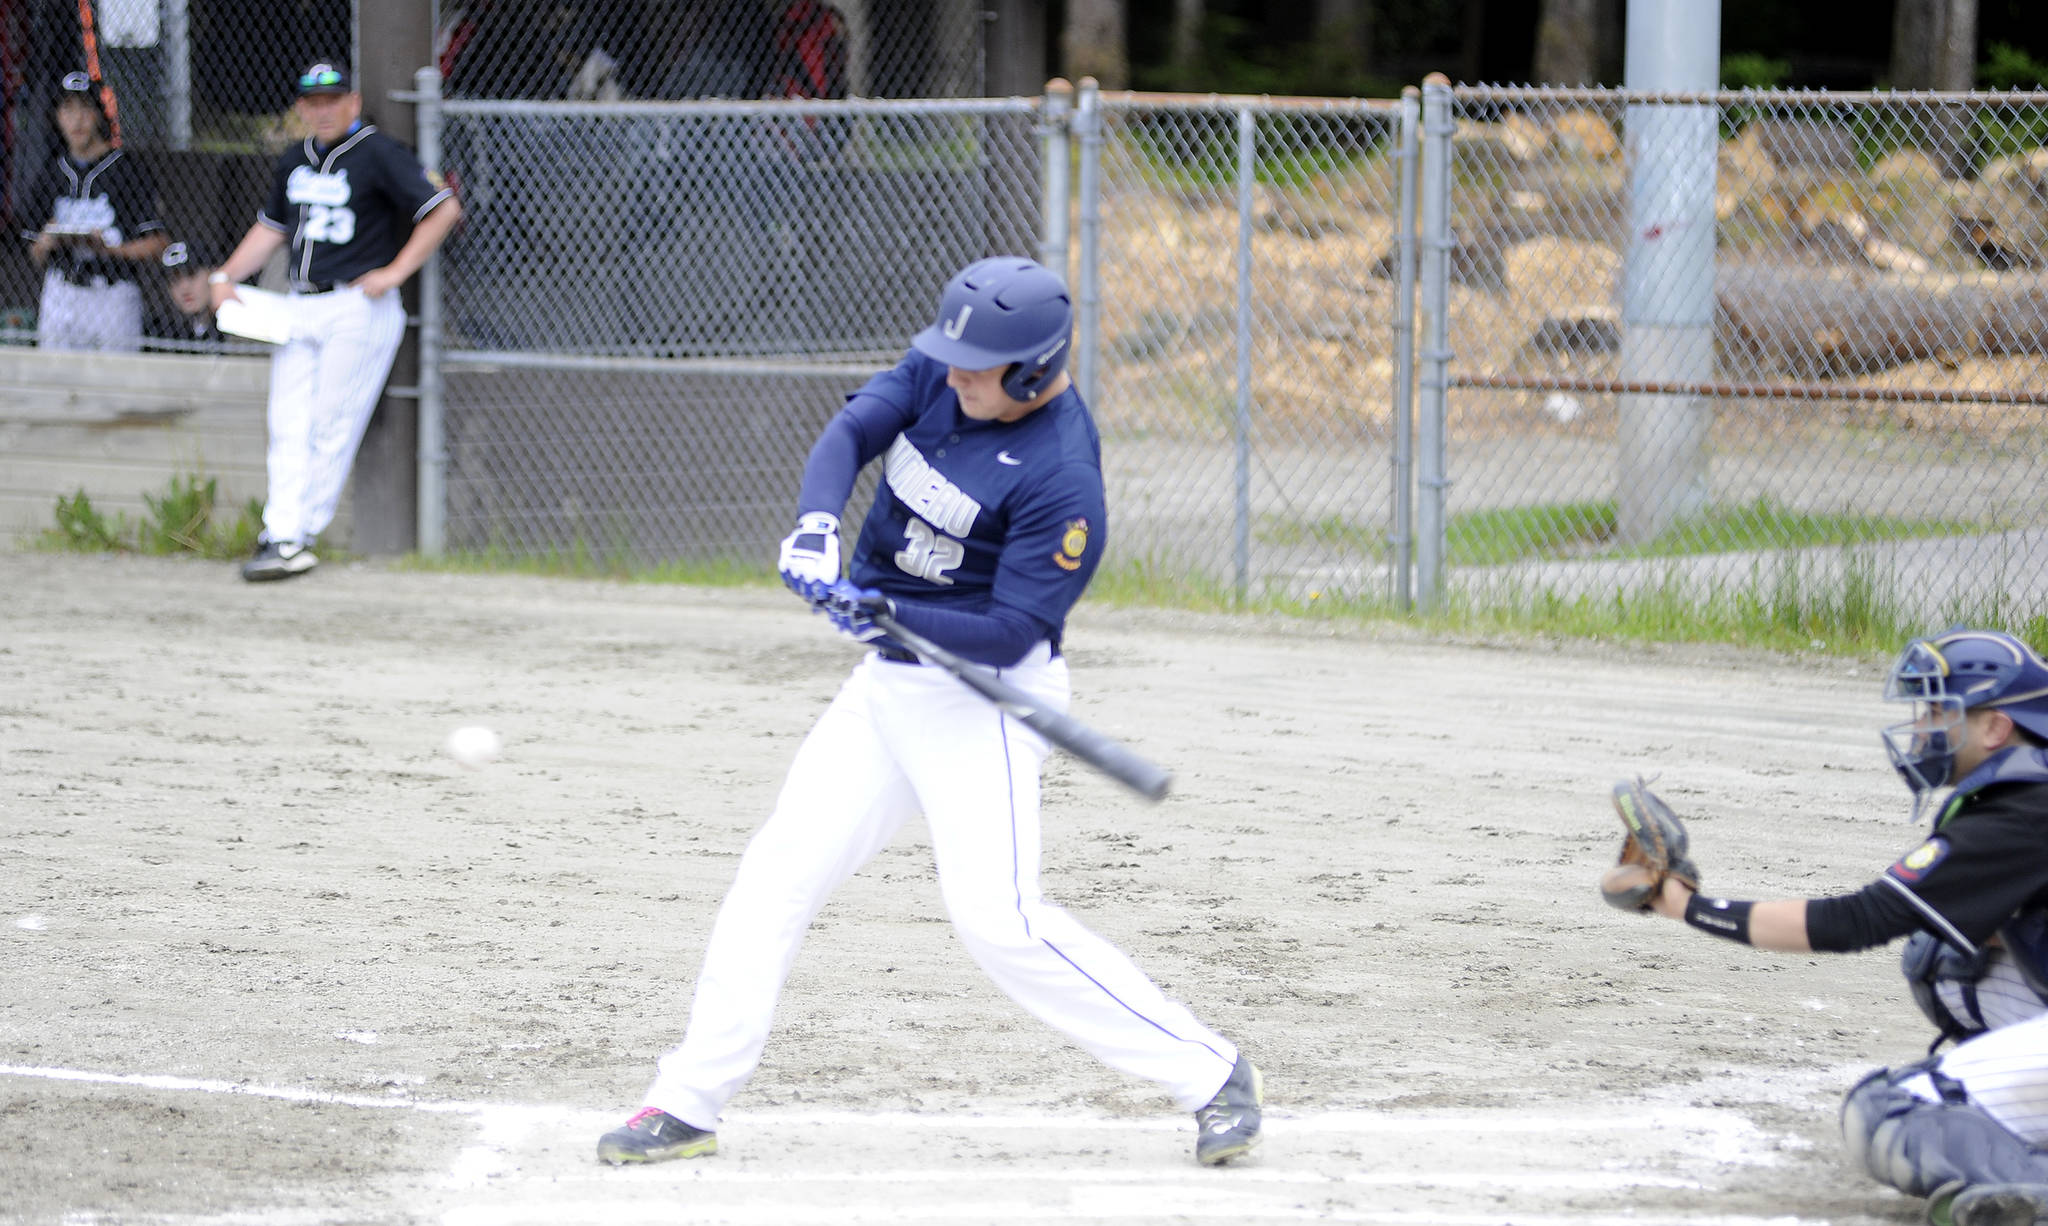 Juneau Post 25’s Bobby Cox lines out to left field in the first inning against Chugiak Post 33 on Saturday. (Nolin Ainsworth | Juneau Empire)